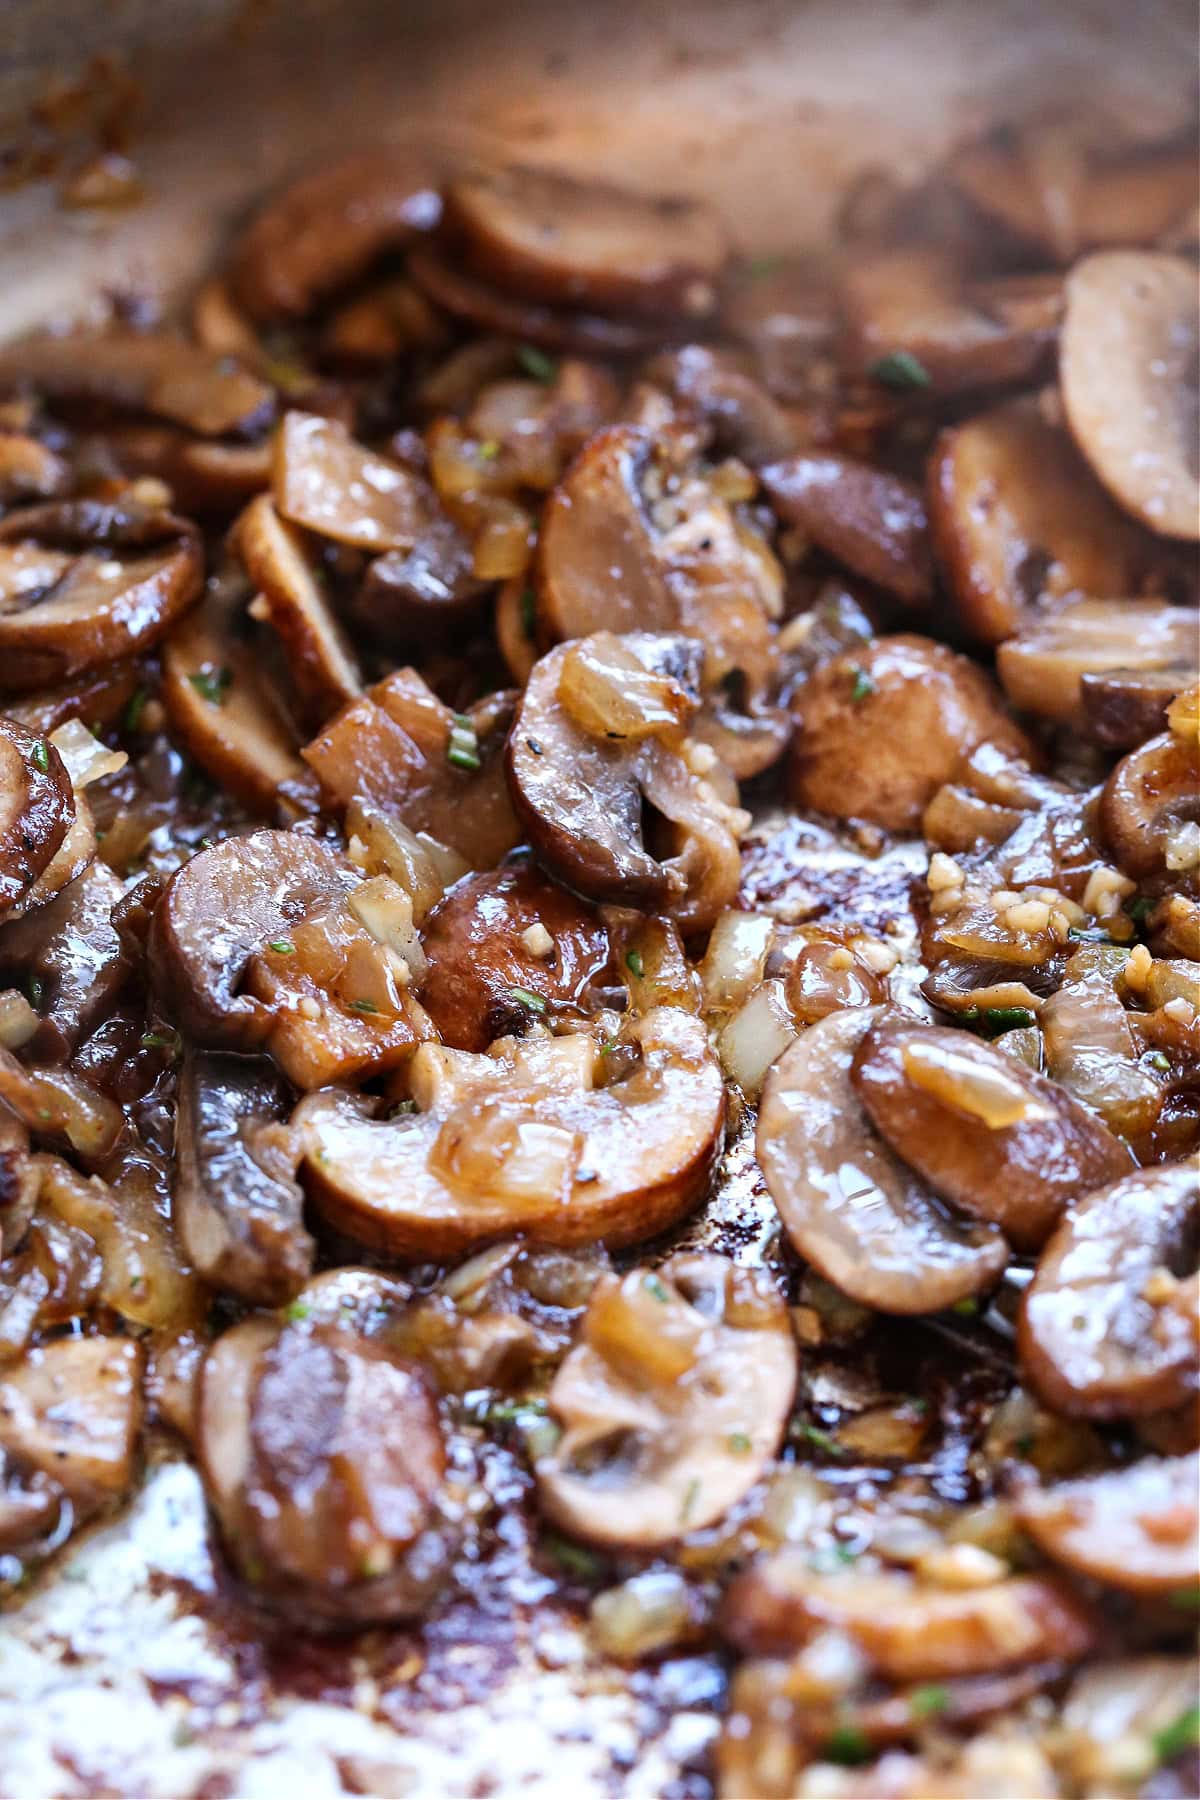 cooked, sliced mushrooms in a skillet with onions and garlic